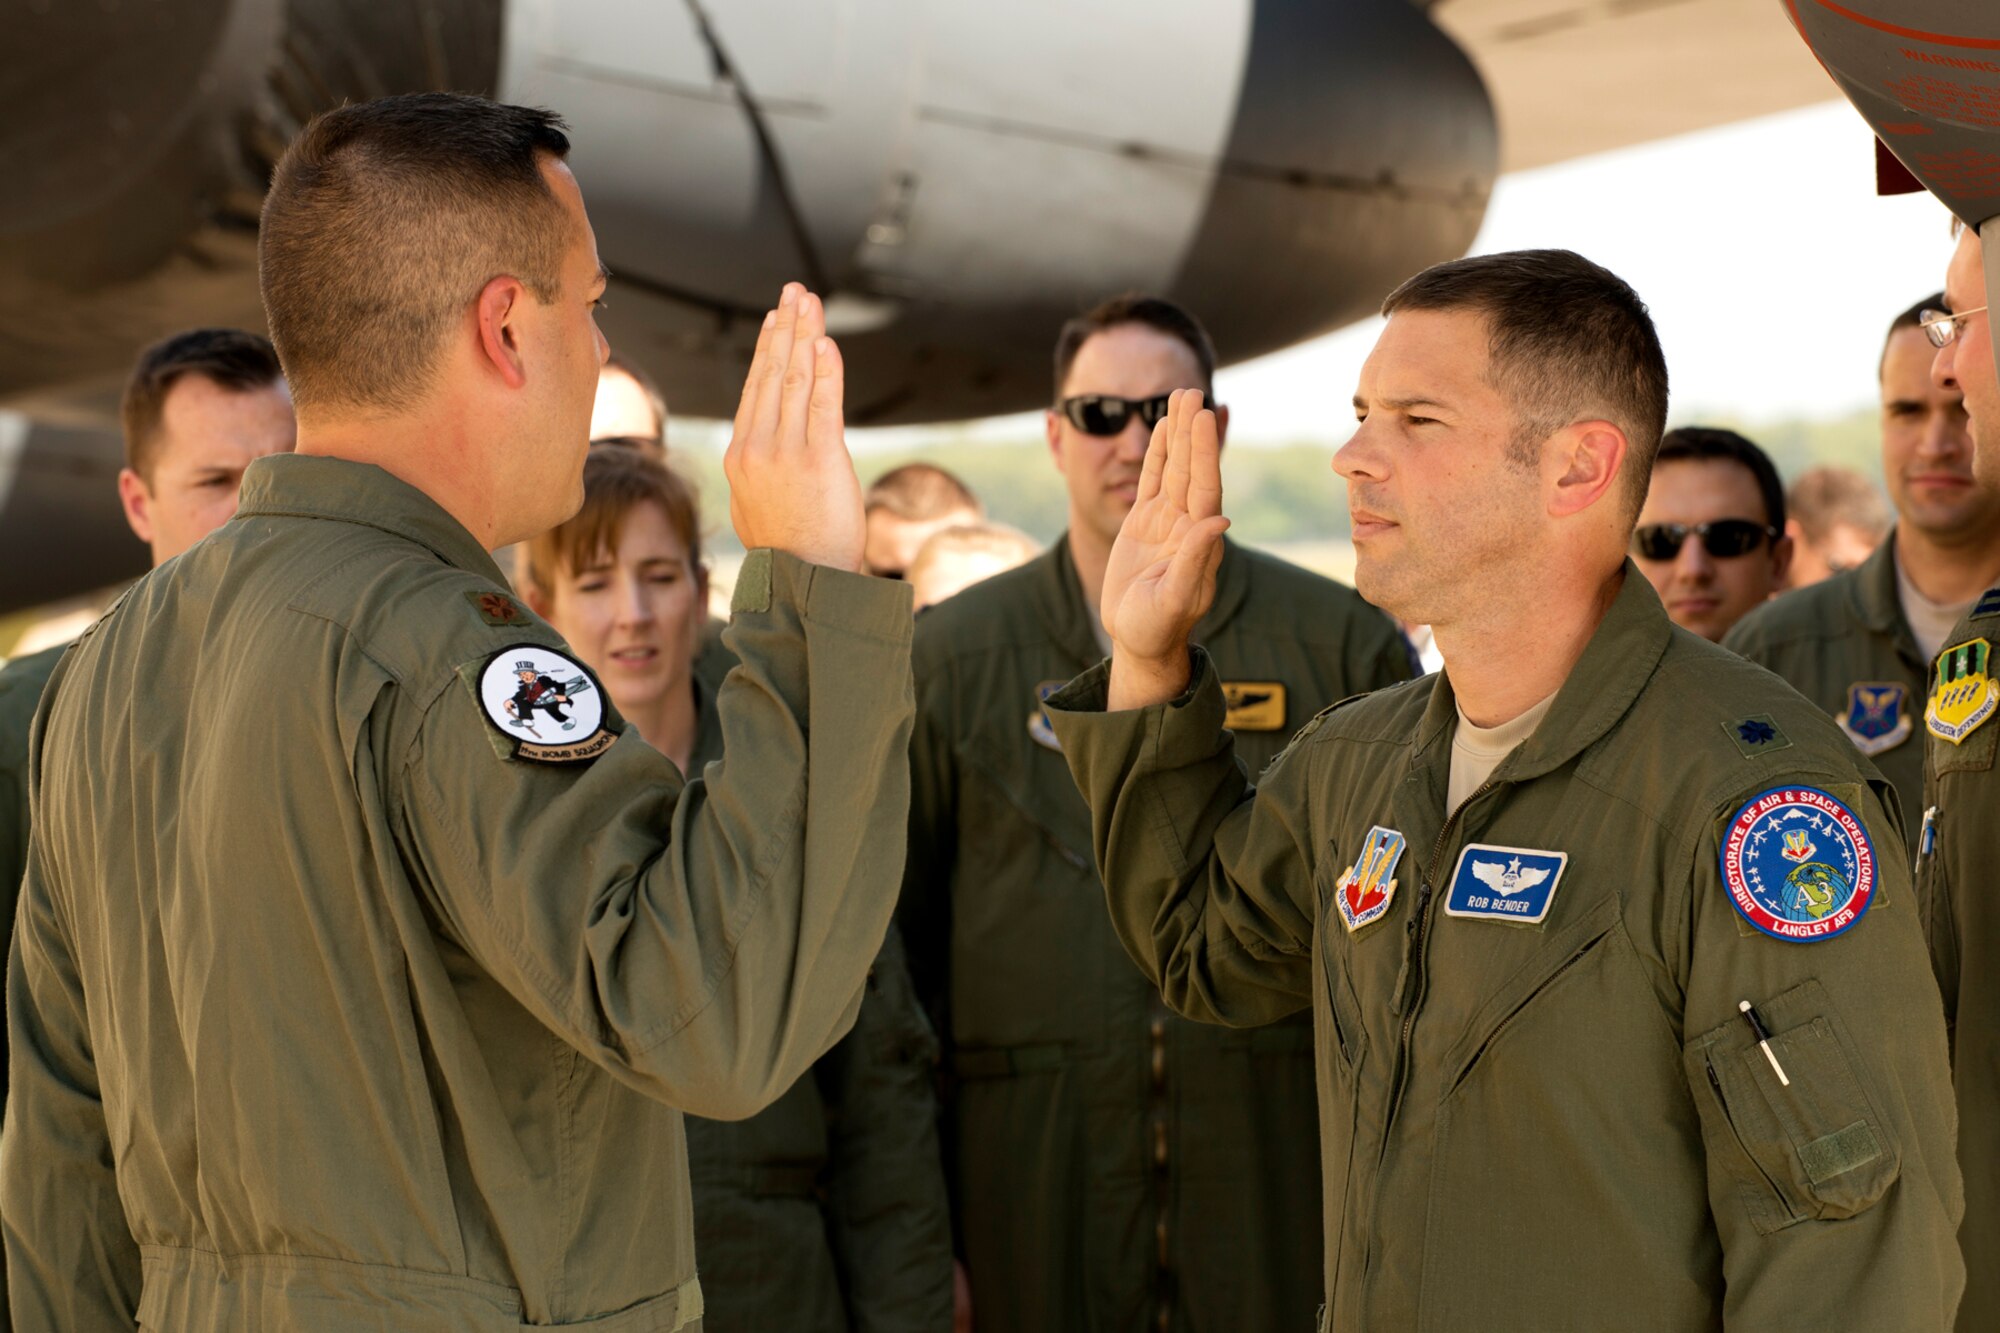 U.S. Air Force Maj. Brian Heck (left) recites the oath during a Pinning On ceremony, Sept. 28, 2012, Barksdale Air Force Base, La. Lt. Col. Robert Bender officiated the ceremony, which was held in front of a B-52H Stratofortress. (U.S. Air Force photo by Master Sgt. Greg Steele/Released)